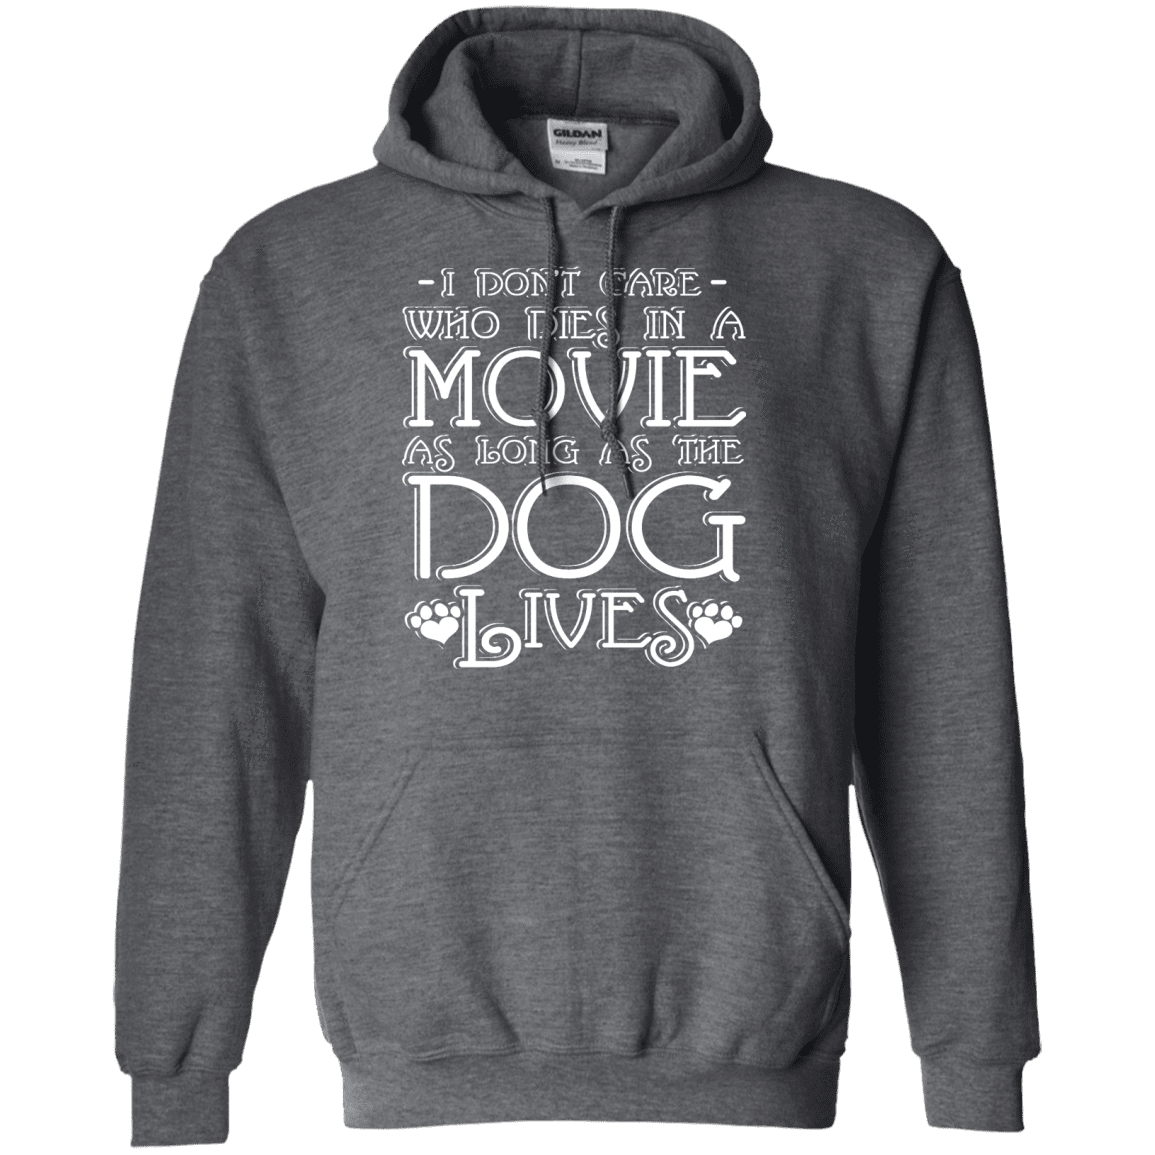 I Dont Care Who Dies In A Movie - Hoodie.